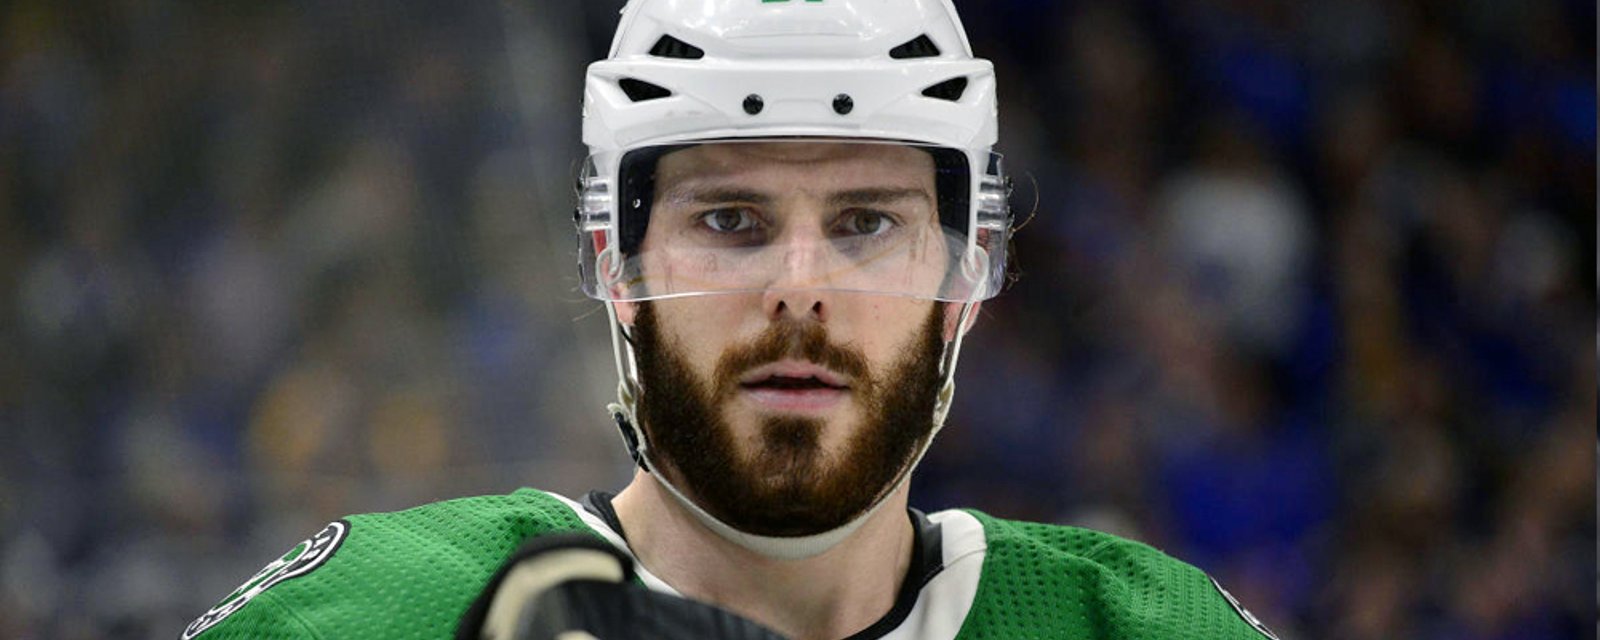 Seguin follows Toews' lead, issues a stirring statement